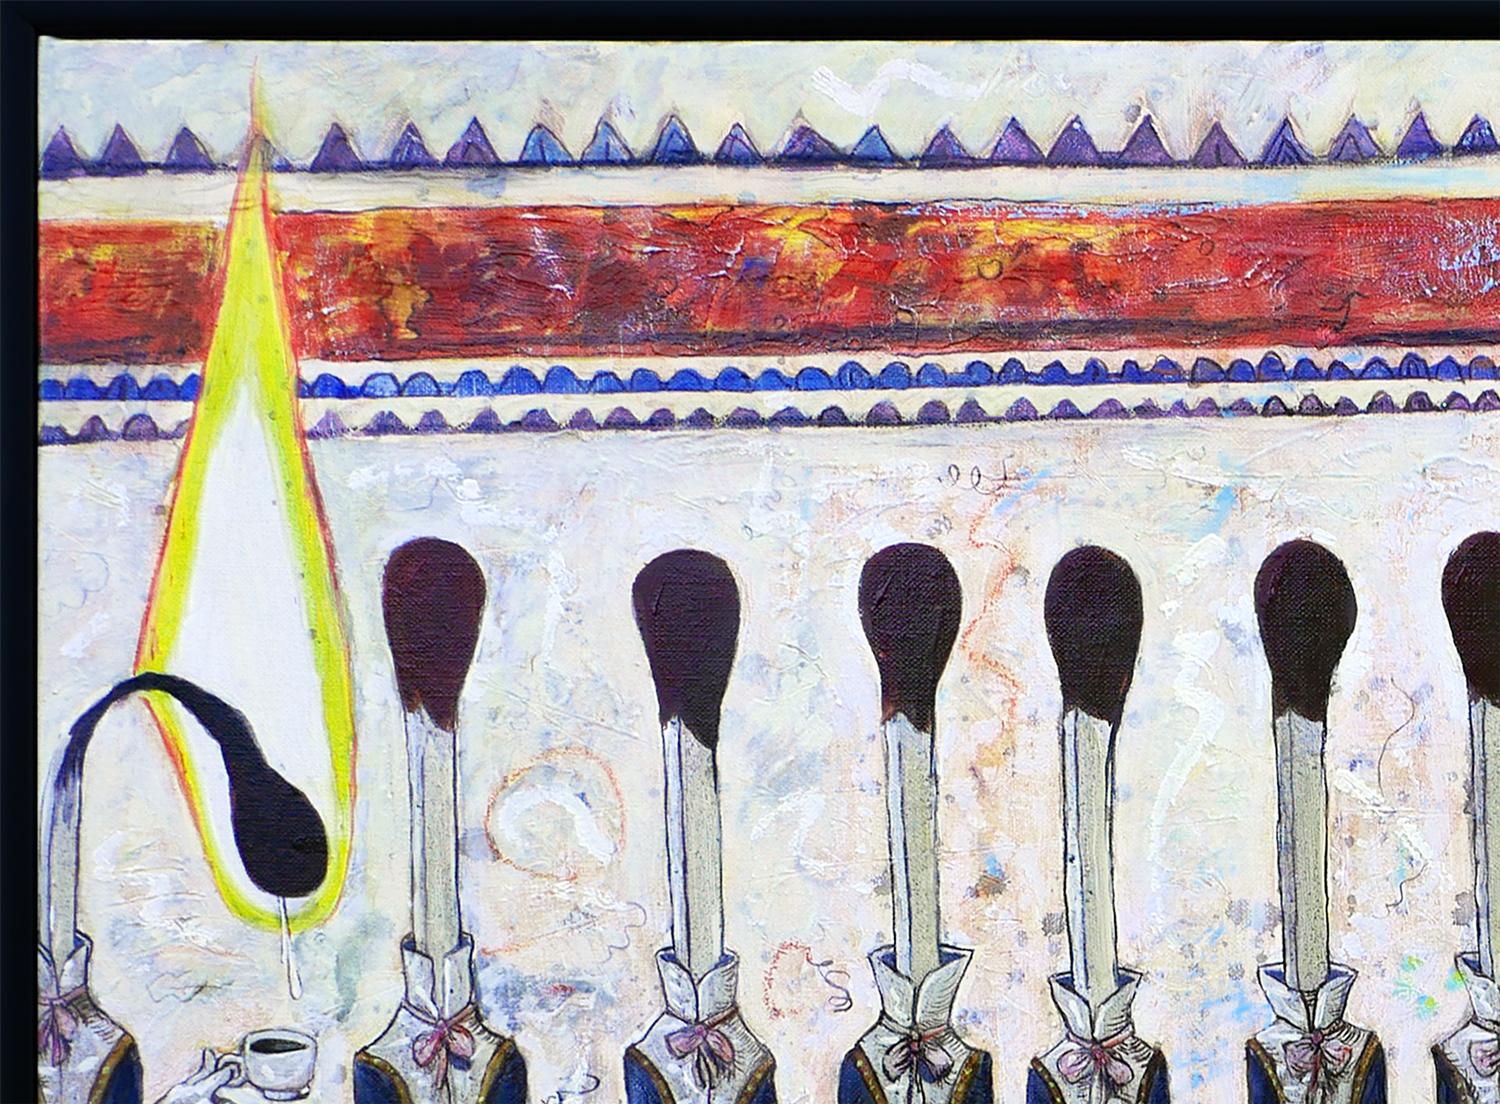 Figurative surrealist oil painting by Cuban artist Douglas Perez Castro. This painting depicts a scene with several figures with matches as heads dressed as servers. All figures are similar in composition and color with slight differences in hand